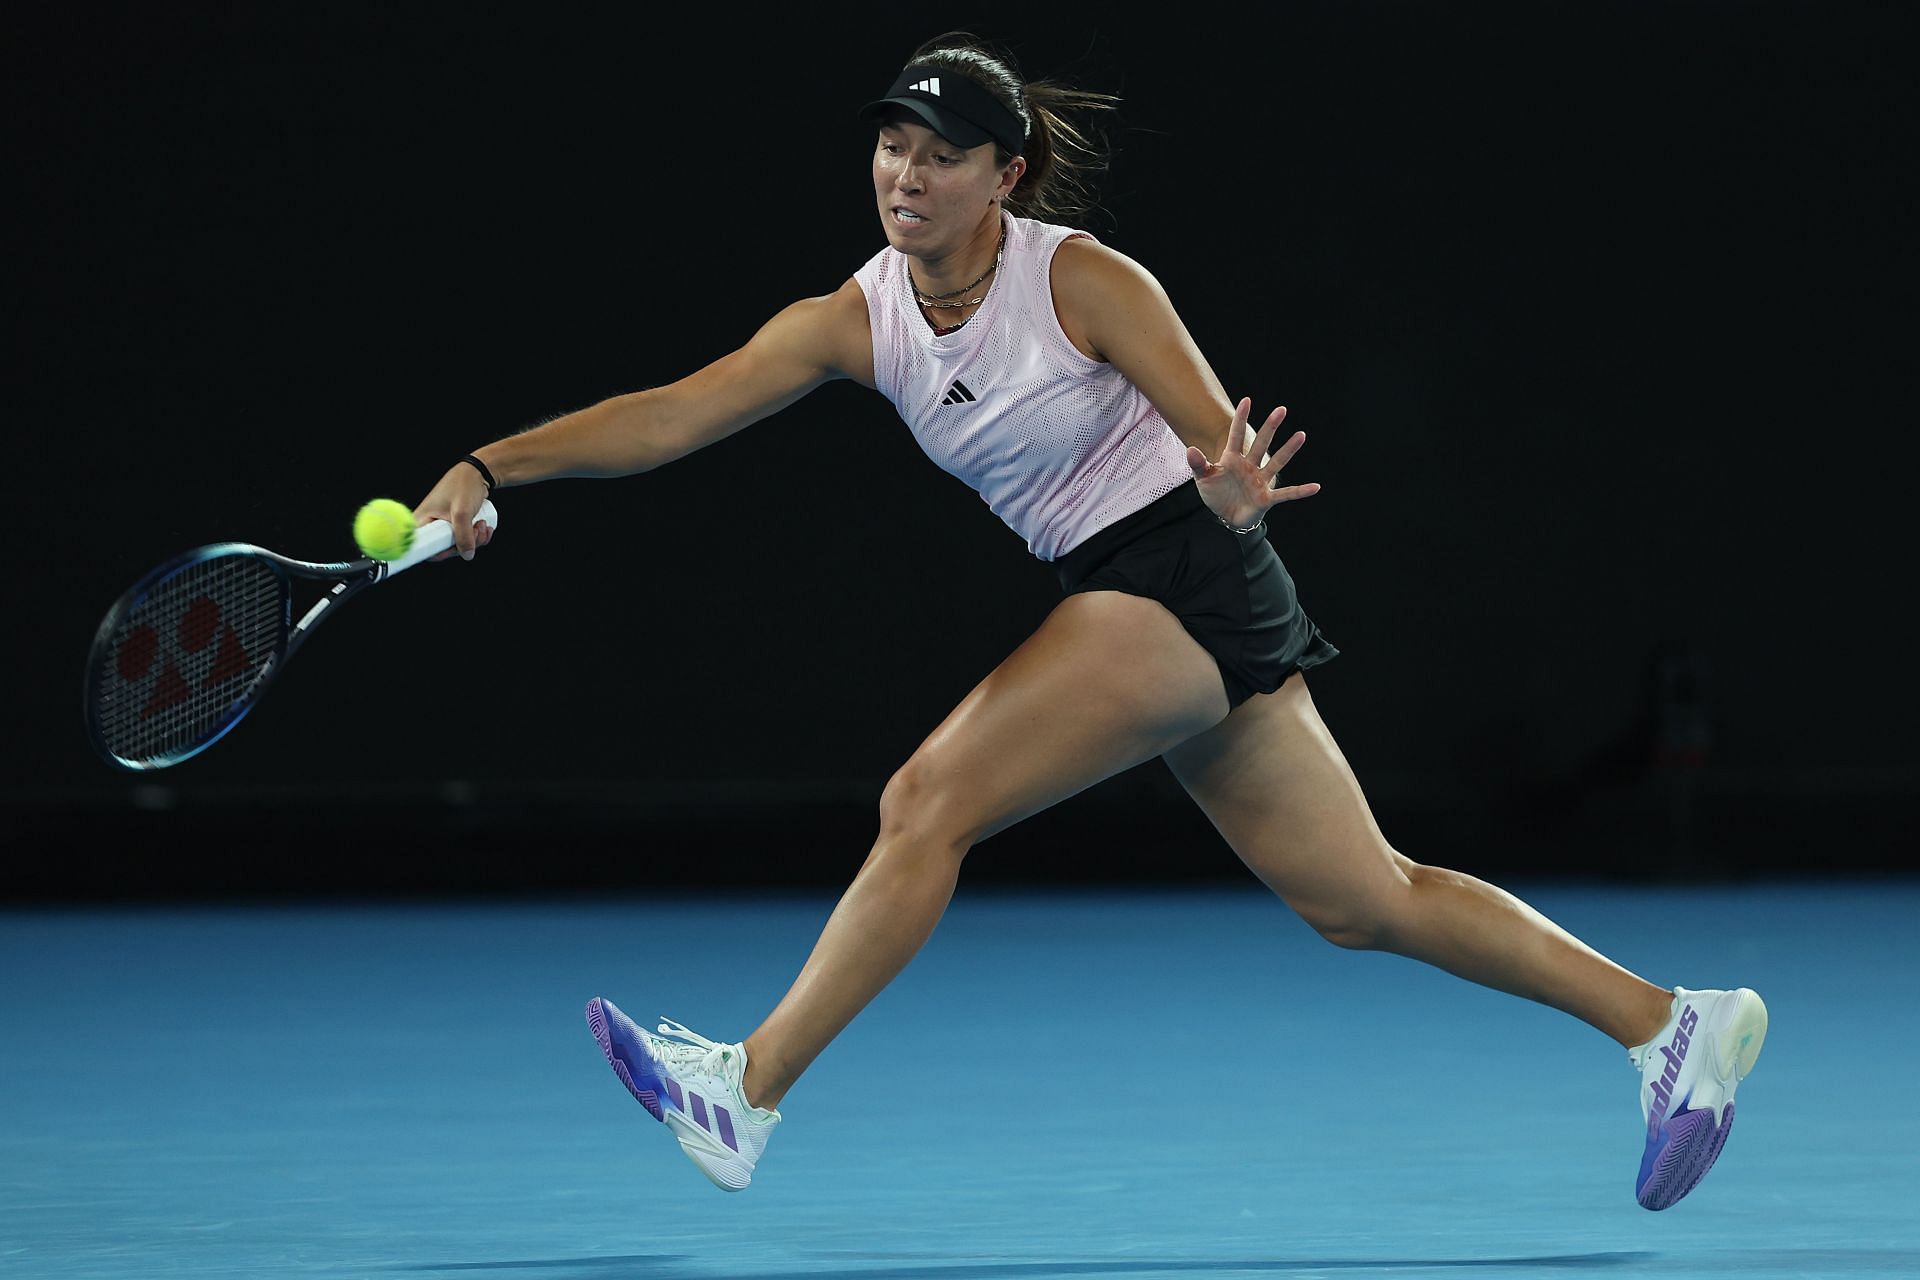 Jessica Pegula in action at the 2023 Australian Open - Day 3.